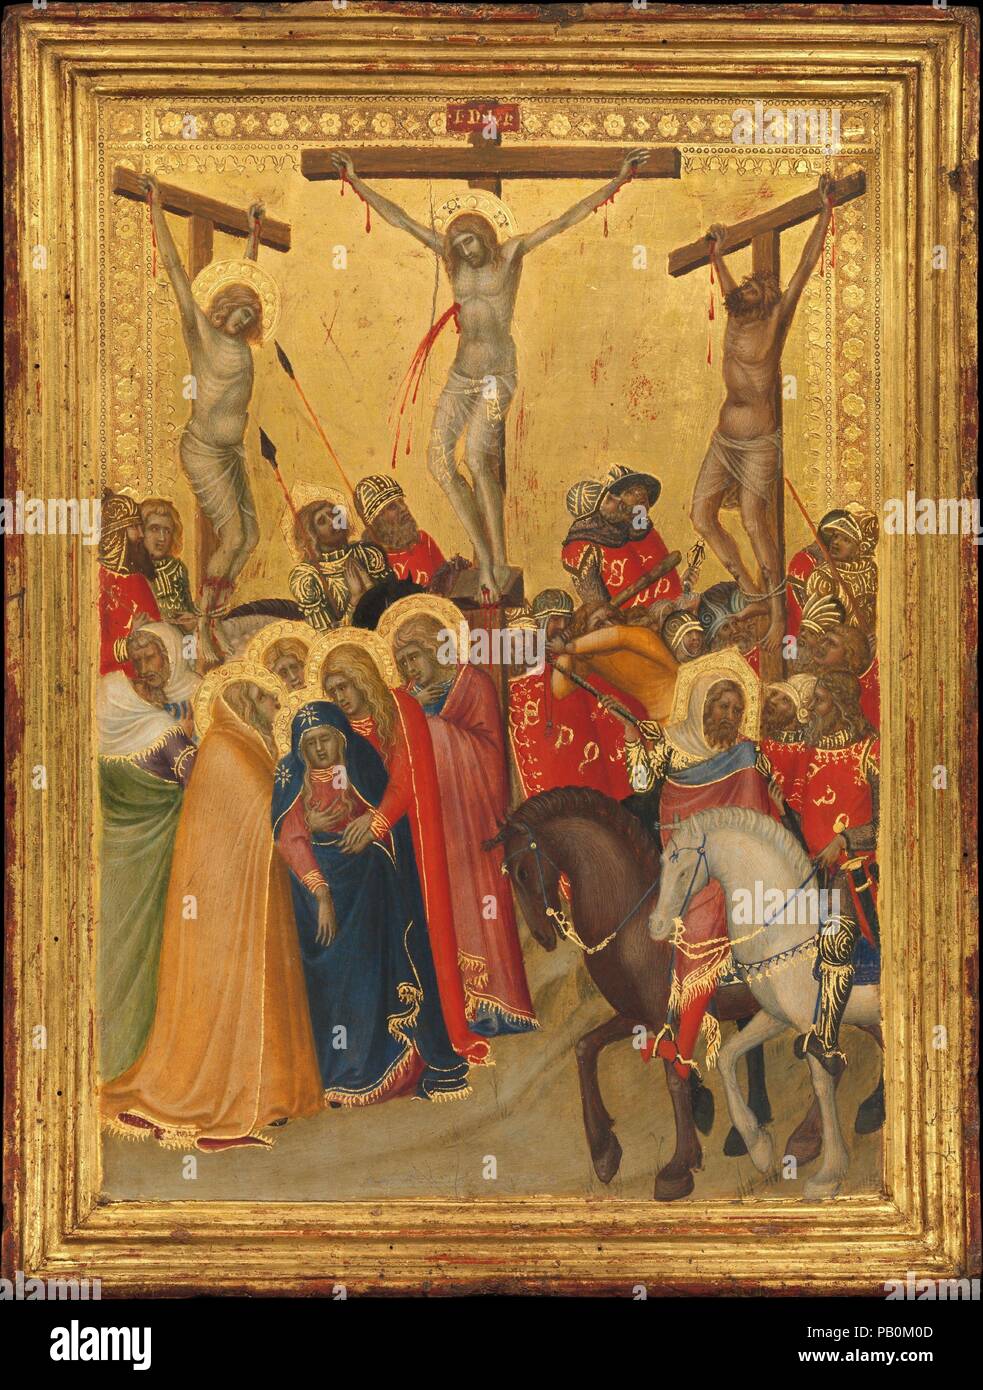 The Crucifixion. Artist: Pietro Lorenzetti (Italian, active Siena 1320-44). Dimensions: Overall 16 1/2 x 12 1/2 in. (41.9 x 31.8 cm); painted surface 14 1/8 x 10 1/8 in. (35.9 x 25.7 cm). Date: 1340s.  One of the great innovators of European painting, Pietro Lorenzetti imbued this familiar biblical subject with a new sense of pathos and dramatic intensity. Details such as the piercing of Christ's side with a spear, the breaking of the legs of the thieves, and the Virgin swooning into the arms of her companions ensure an emotional response from the viewer. A century later, Van Eyck added to the Stock Photo